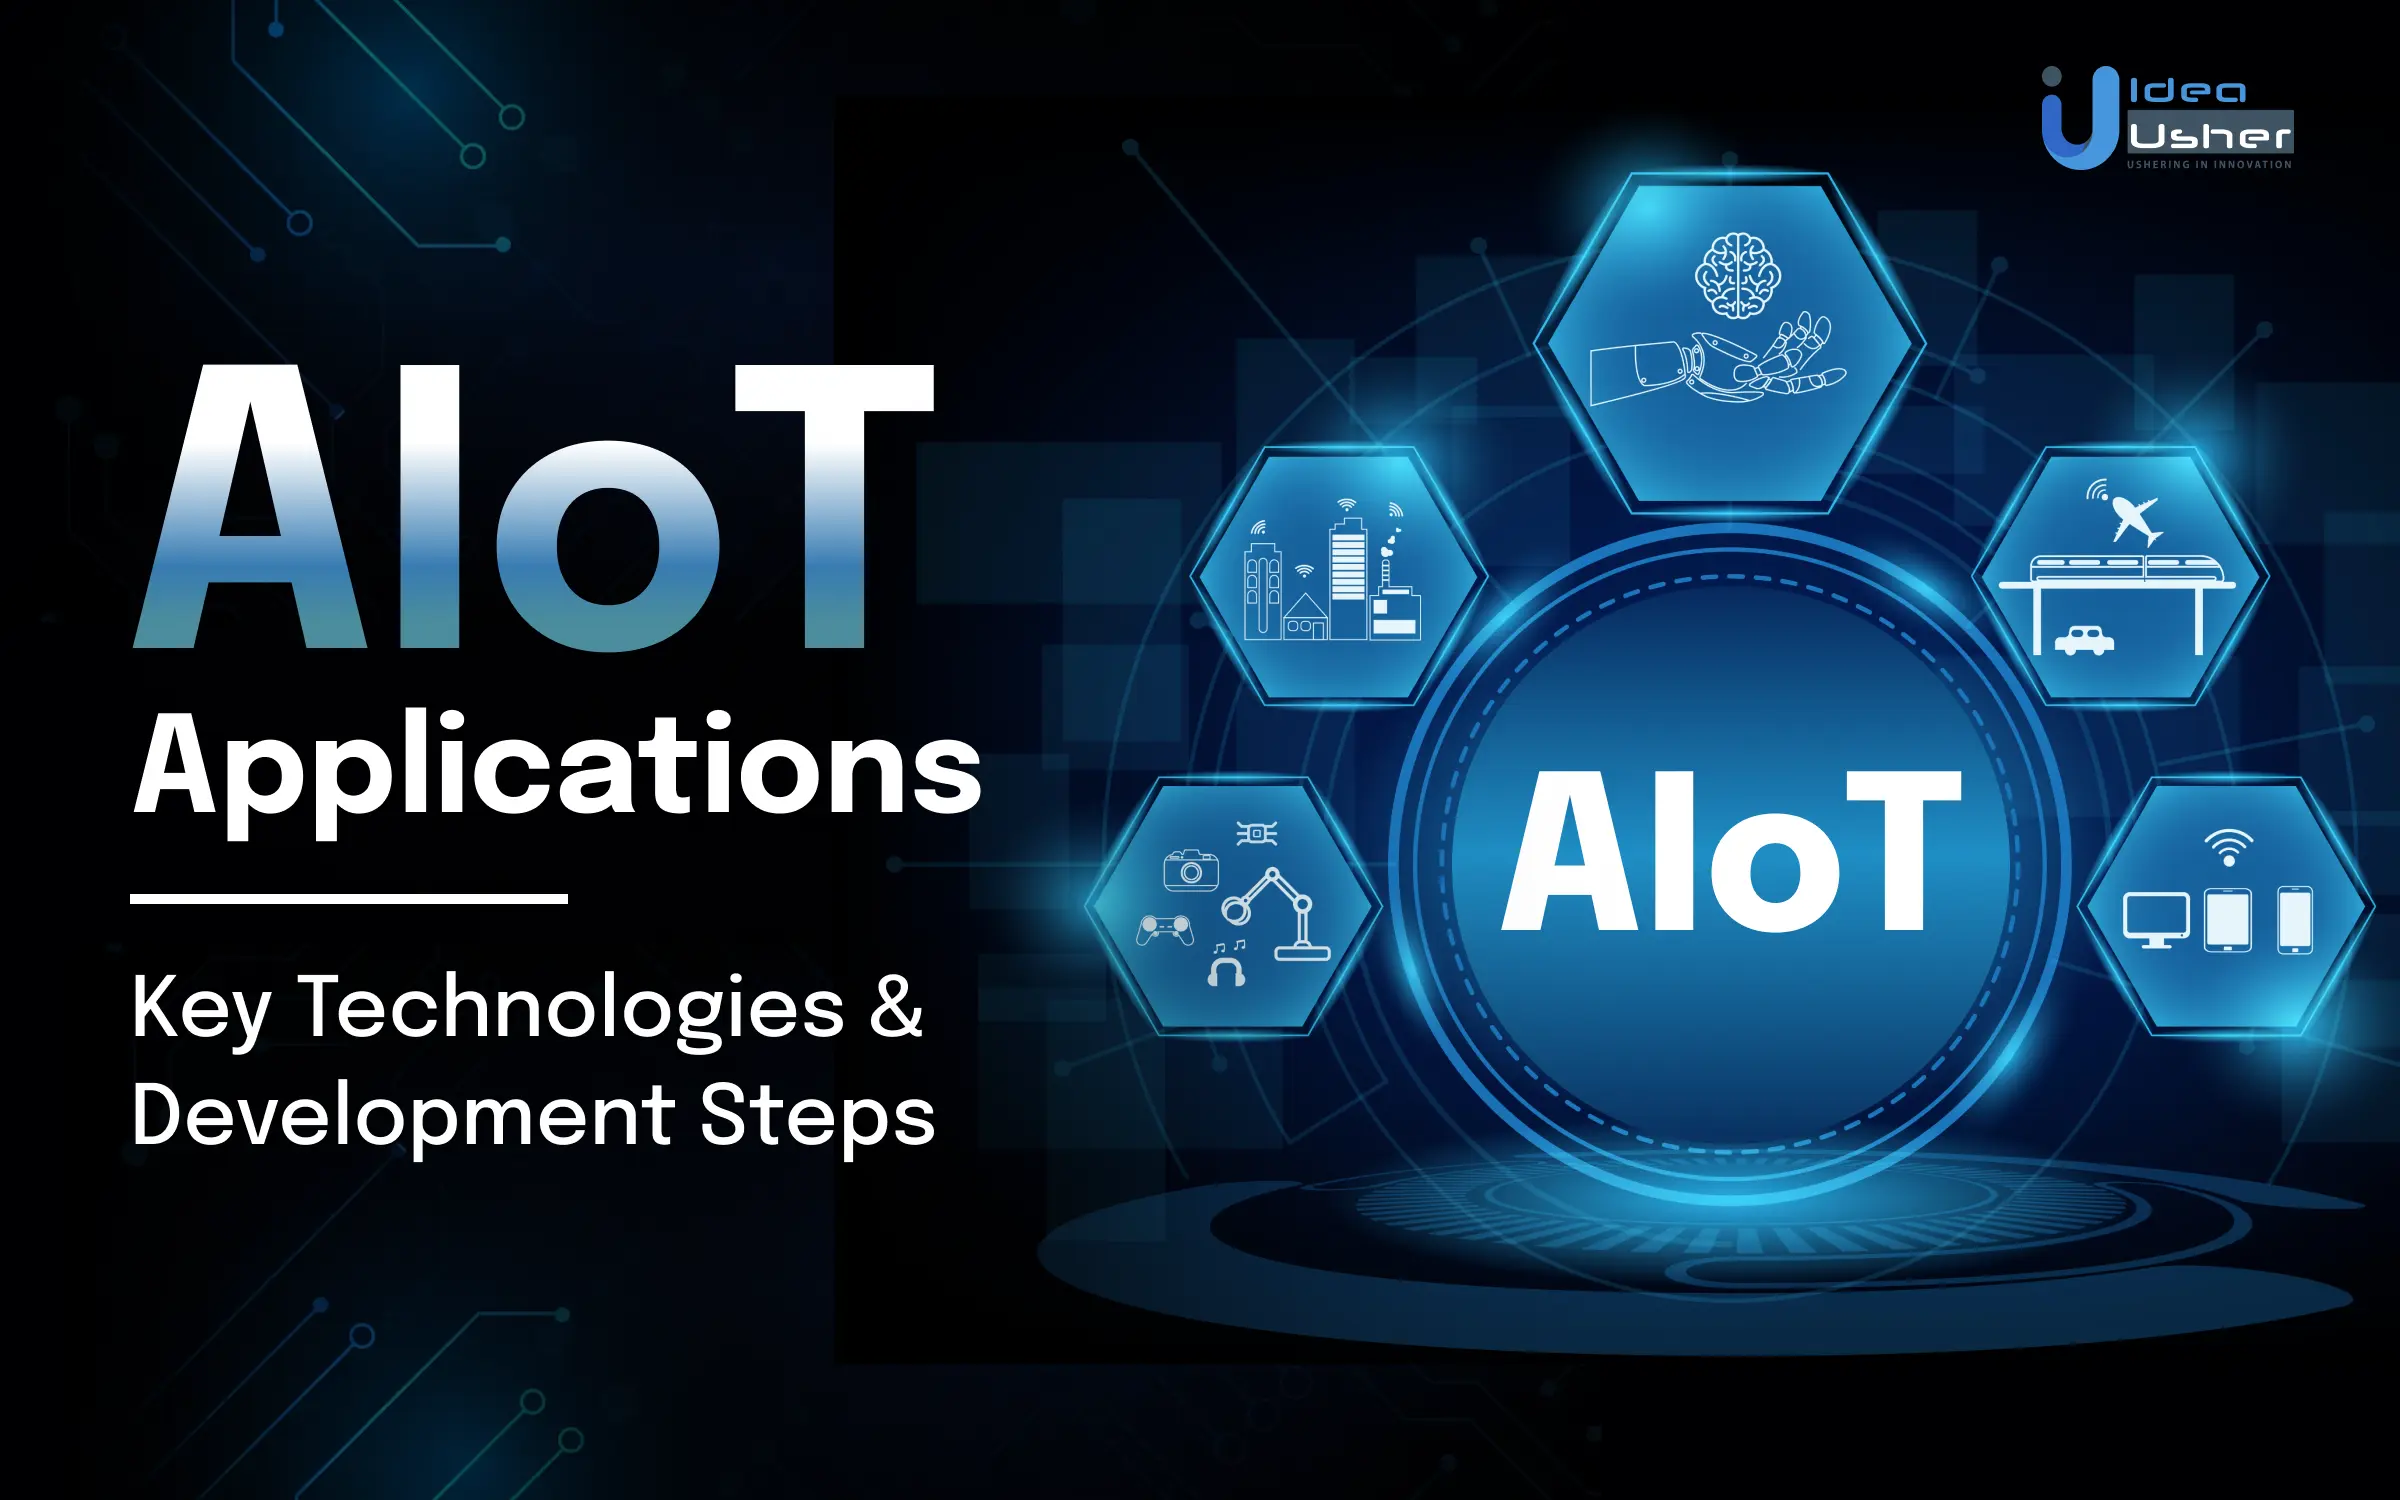 AIoT Applications